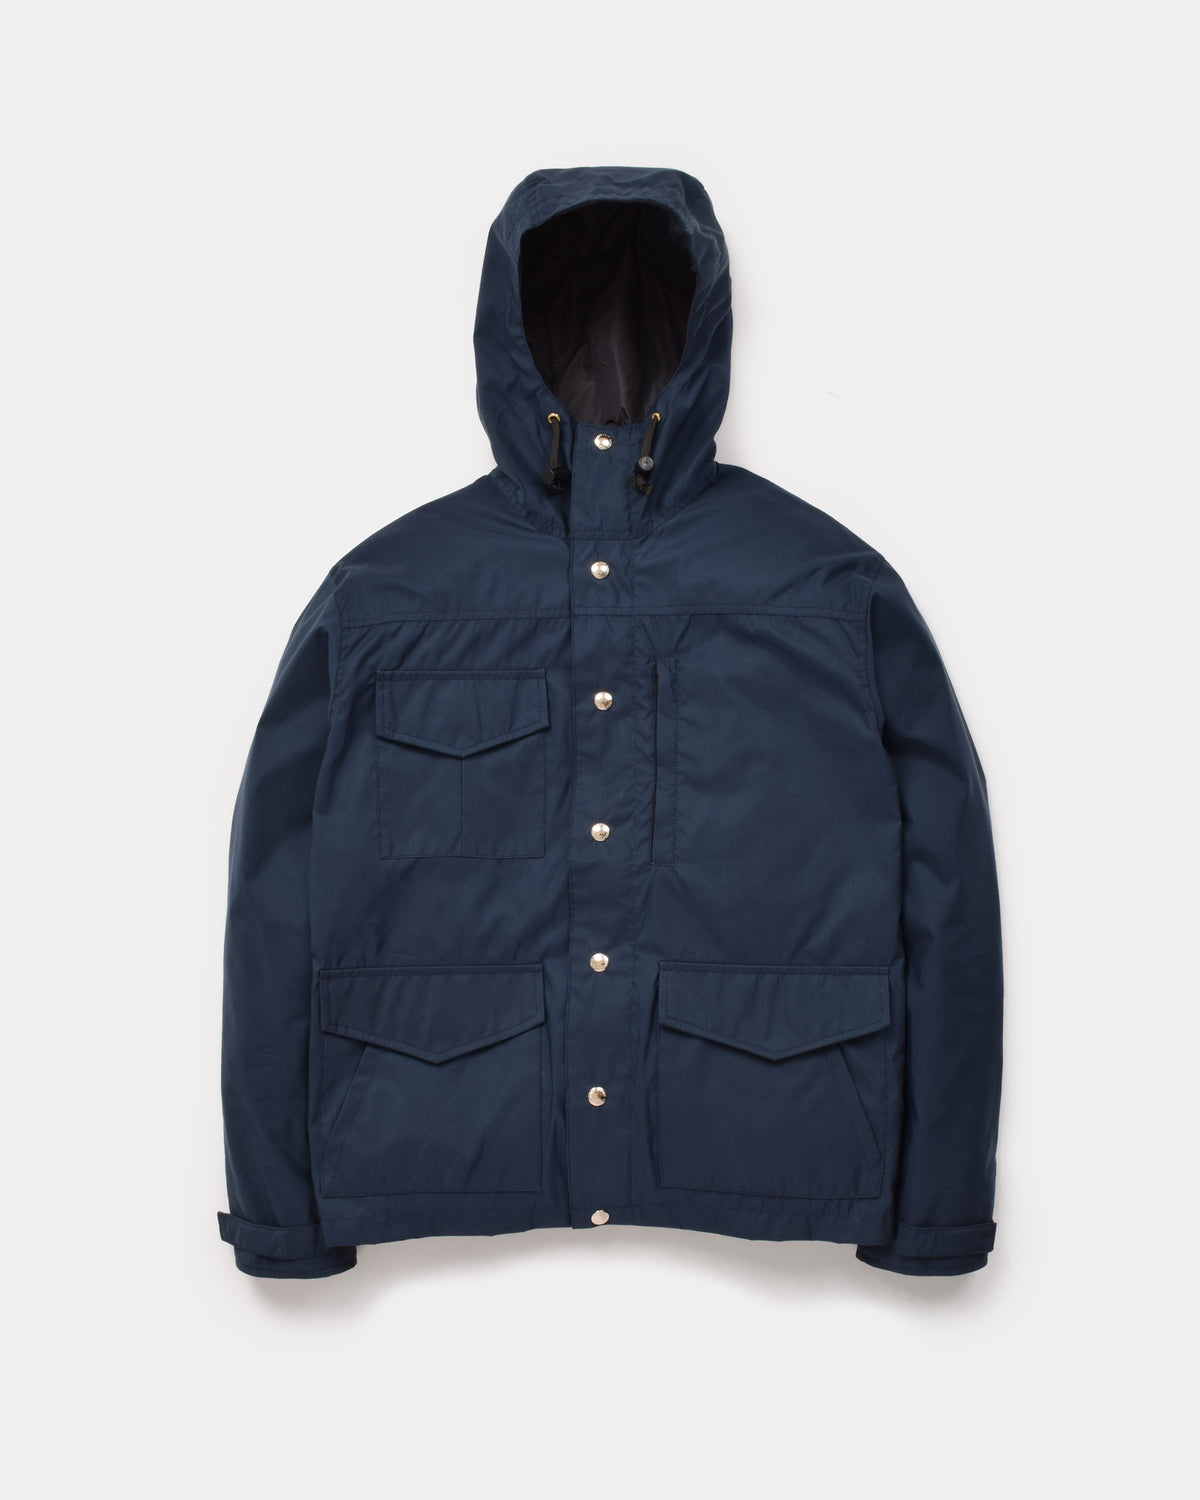 Michi Jacket in Navy showing front of jacket